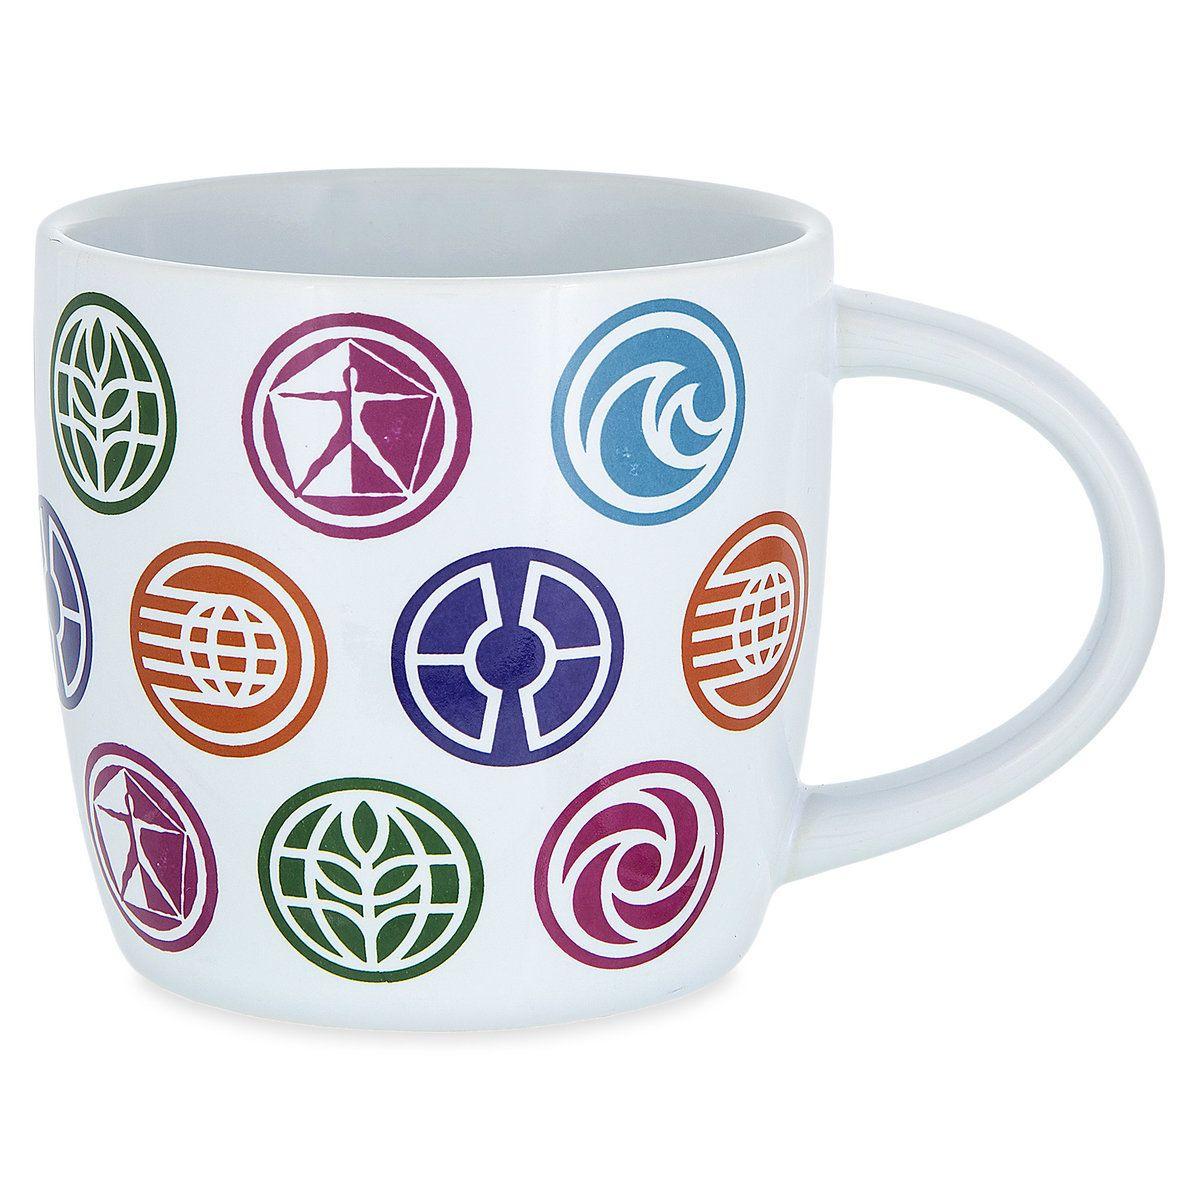 Epcot Logo - Disney Coffee Cup - Epcot 35th Anniversary Logo and Icons